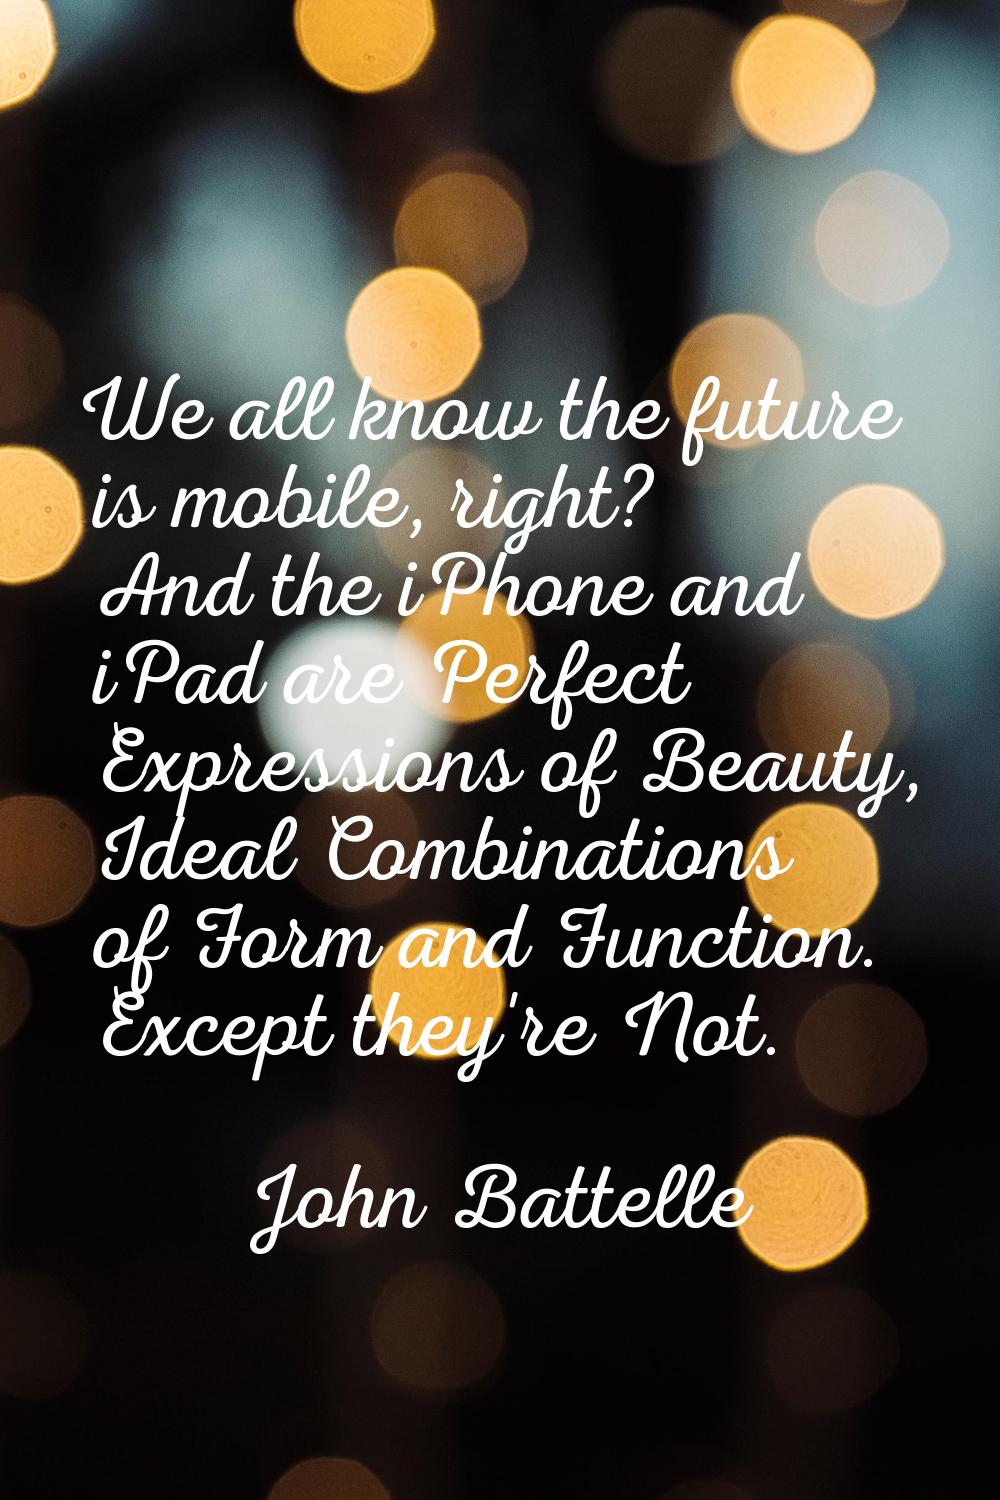 We all know the future is mobile, right? And the iPhone and iPad are Perfect Expressions of Beauty,